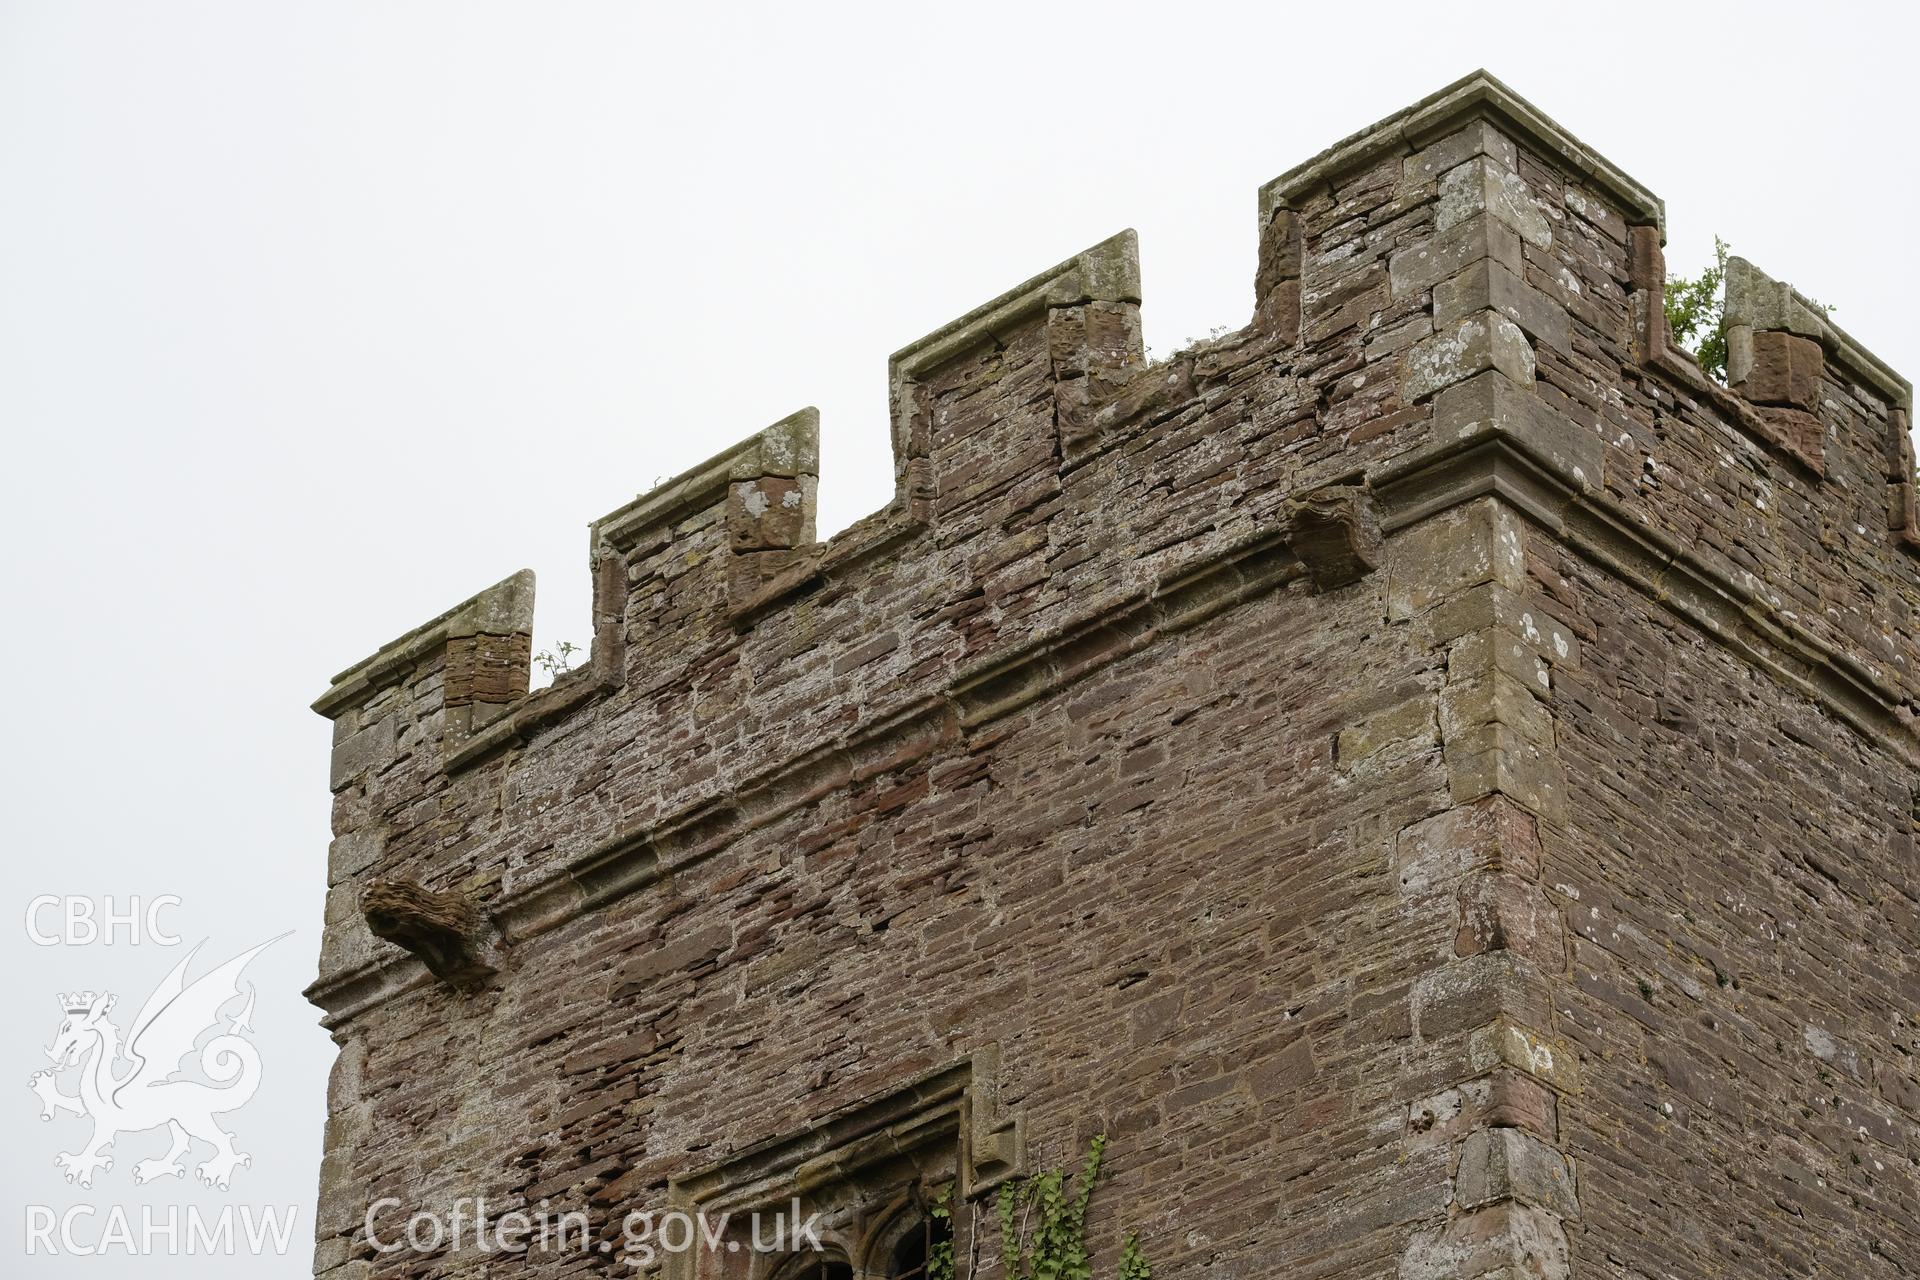 Colour photograph showing Great Porthmel Gatehouse - parapet NW front, looking NE. Produced as part of Historic Building Recording for Great Porthamel Gatehouse, carried out by Richard Hayman, April 2021.